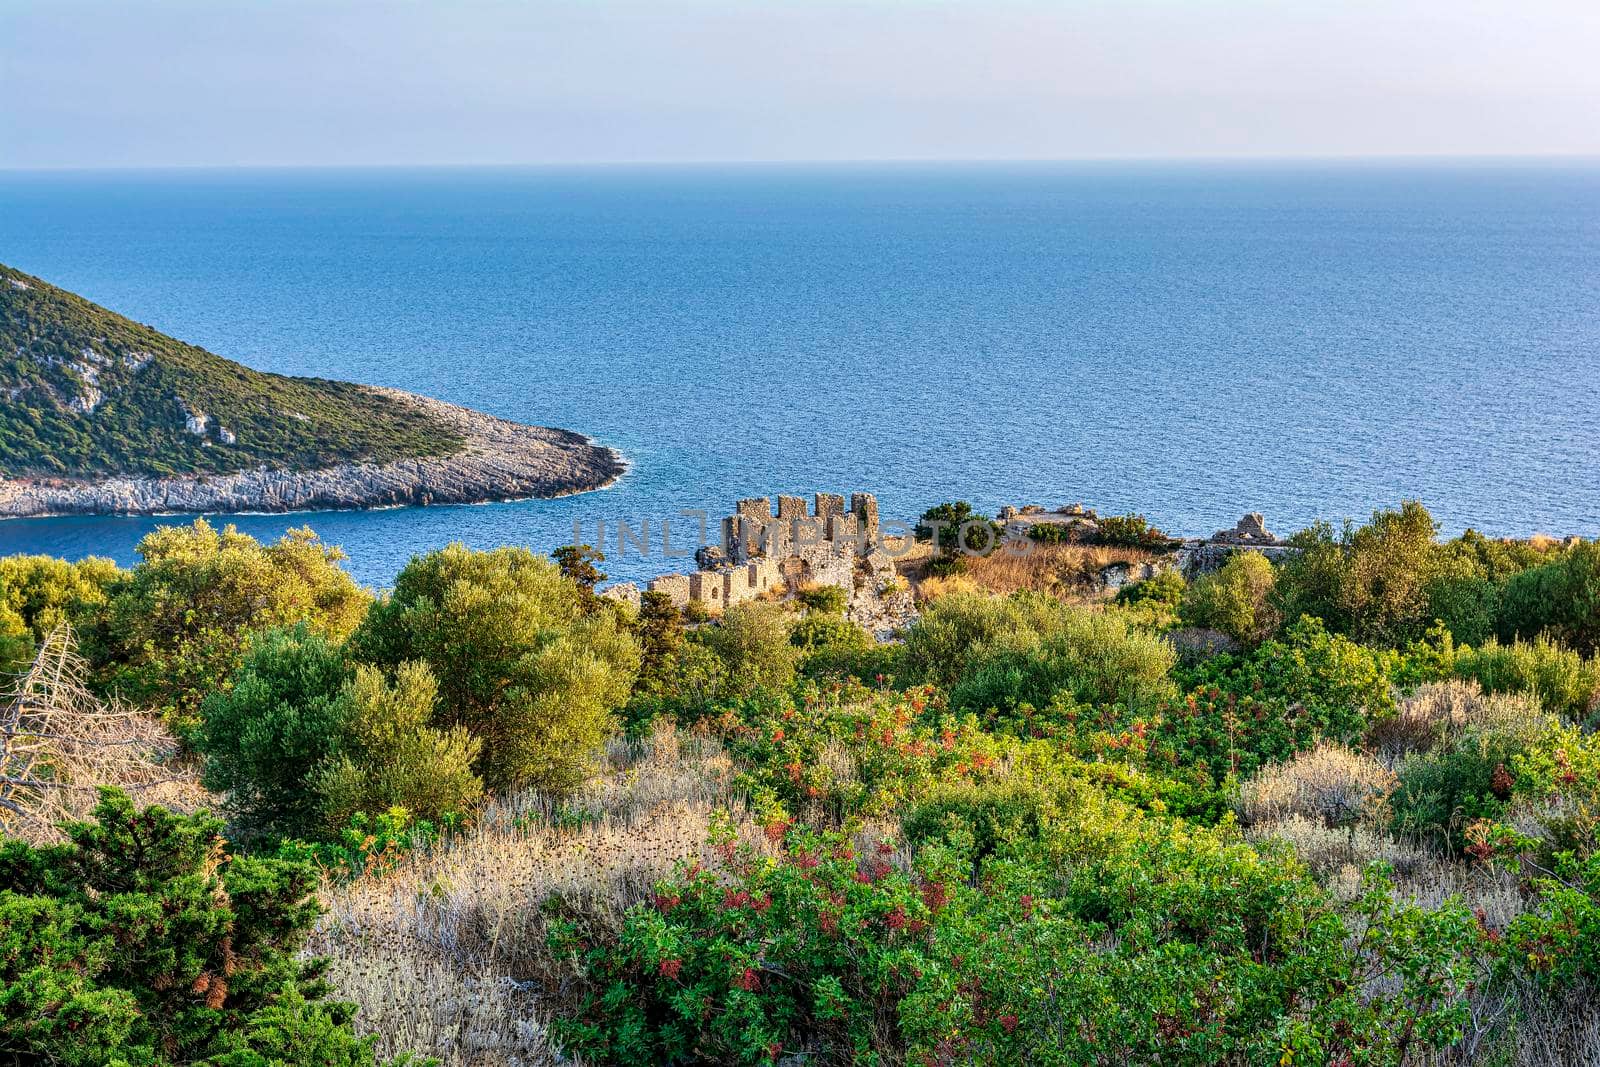 View of Palaiokastro castle of ancient Pylos. Greece. Palaiokastro was built in the 13th century A.D. by the Franks.